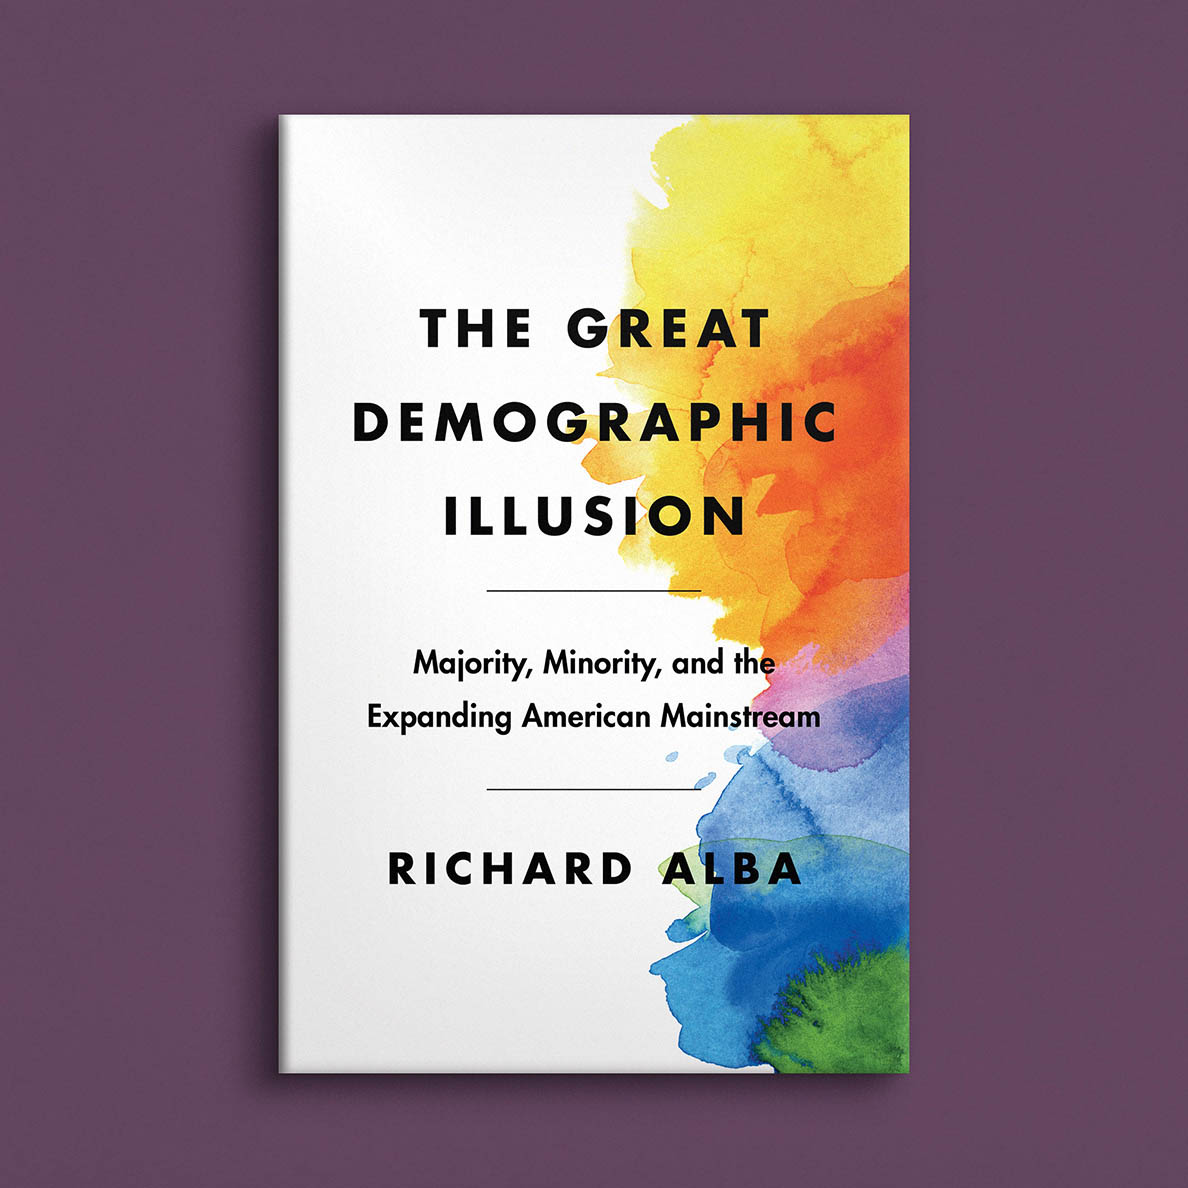 The Great Demographic Illusion book cover